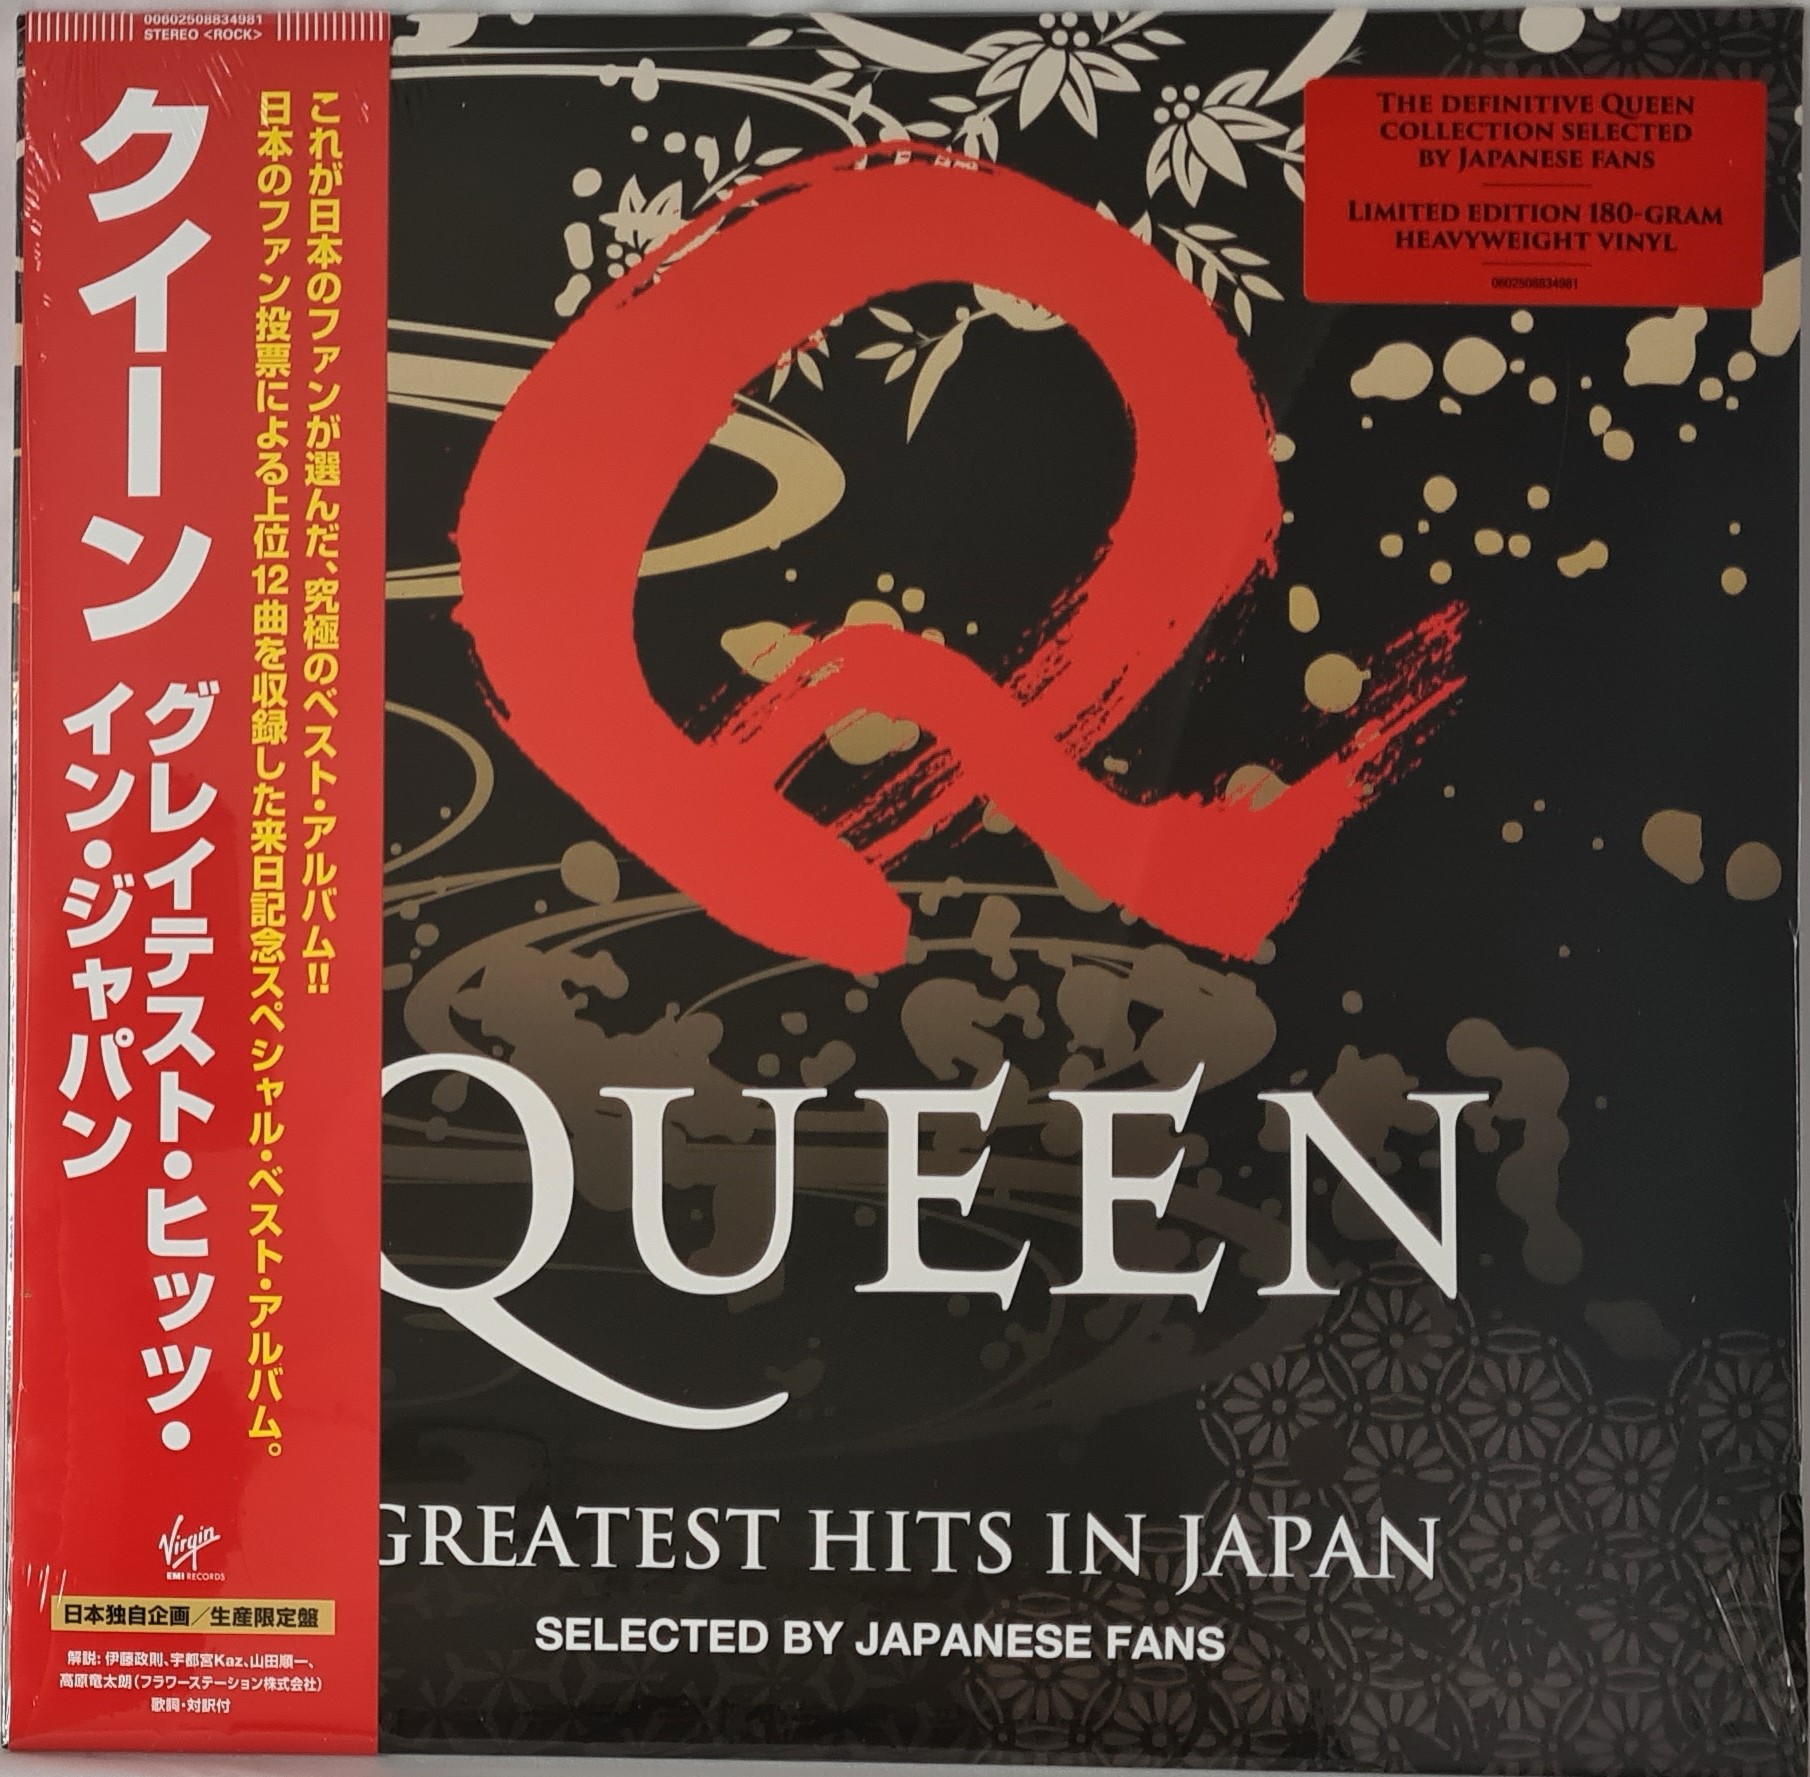 QUEEN Greatest Hits In Japan Vinyl - New & Used Vinyl records, music CDs,  audio cassettes online shop UK